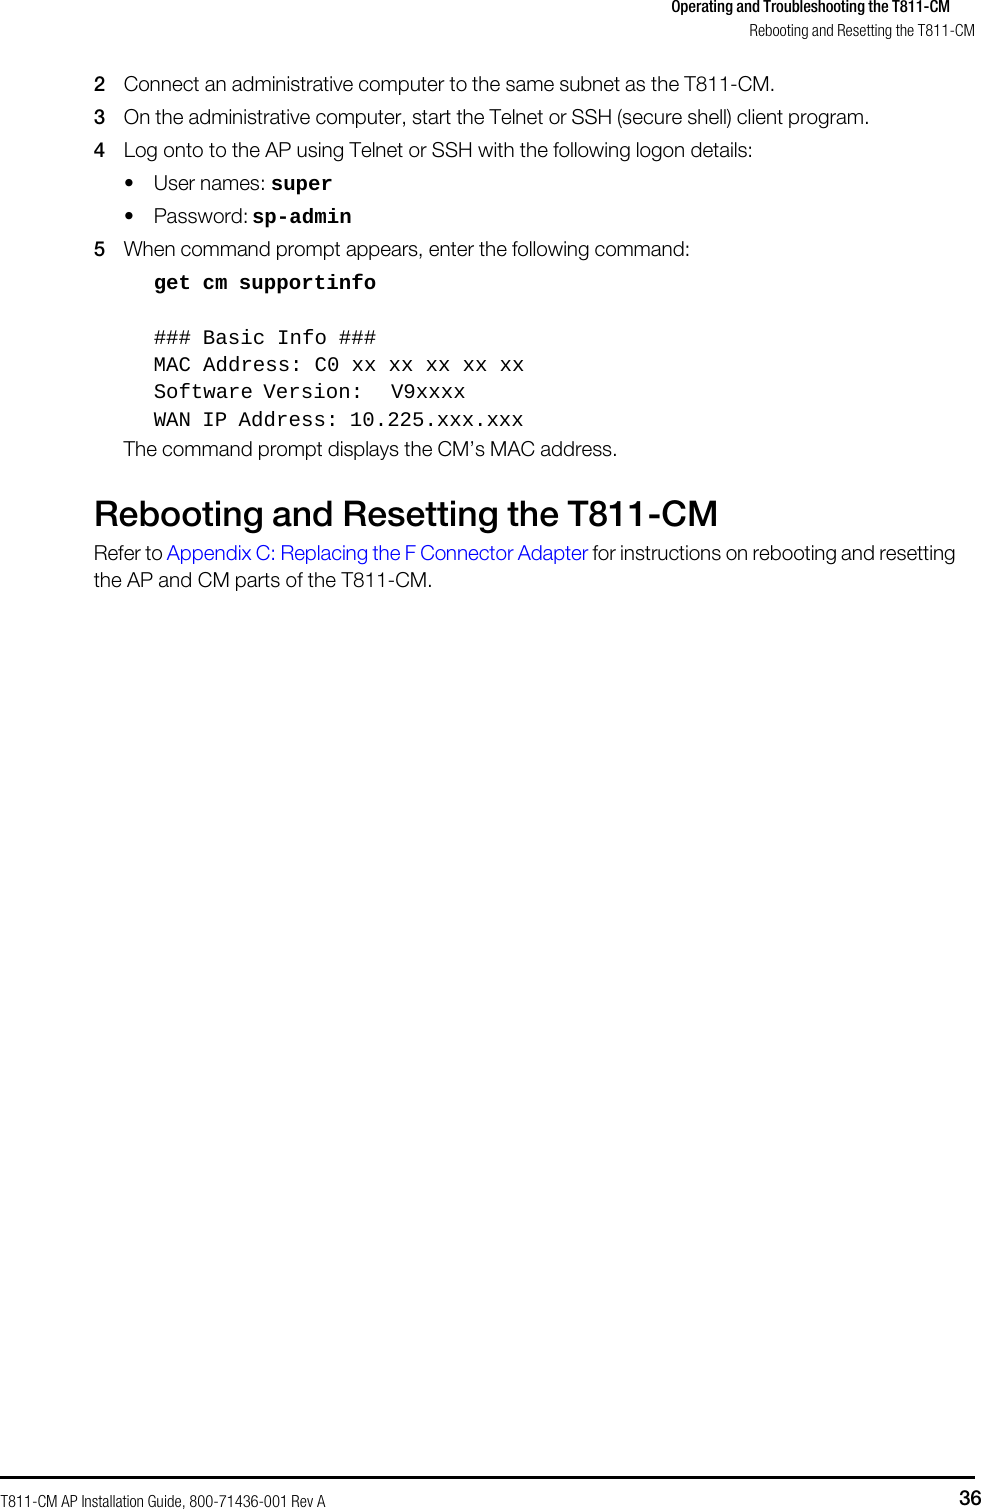 T811-CM AP Installation Guide, 800-71436-001 Rev A 36 Operating and Troubleshooting the T811-CM     Rebooting and Resetting the T811-CM  2 Connect an administrative computer to the same subnet as the T811-CM. 3 On the administrative computer, start the Telnet or SSH (secure shell) client program. 4 Log onto to the AP using Telnet or SSH with the following logon details: • User names: super • Password: sp-admin 5 When command prompt appears, enter the following command: get cm supportinfo  ### Basic Info ### MAC Address: C0 xx xx xx xx xx Software Version: V9xxxx WAN IP Address: 10.225.xxx.xxx The command prompt displays the CM’s MAC address.  Rebooting and Resetting the T811-CM Refer to Appendix C: Replacing the F Connector Adapter for instructions on rebooting and resetting the AP and CM parts of the T811-CM. 